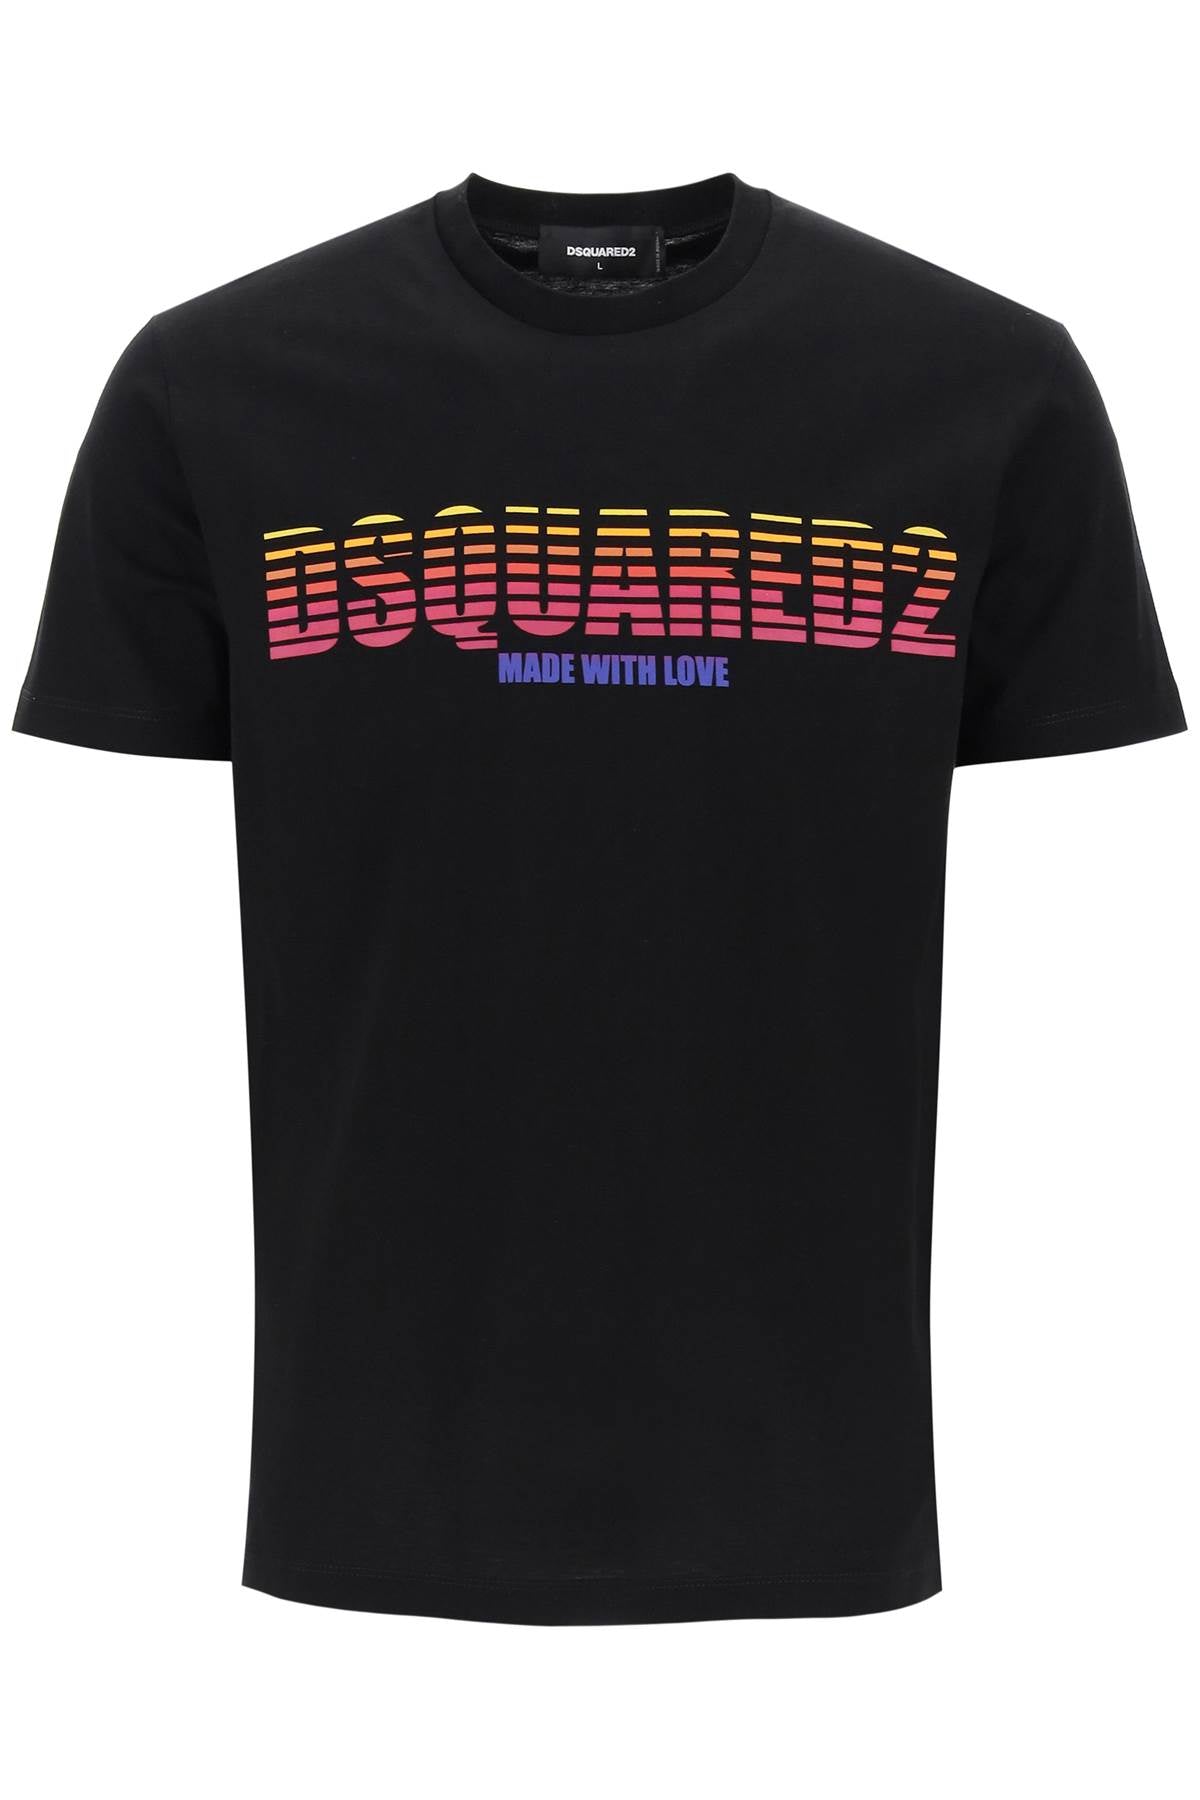 Dsquared2 "logoed cool fit t-0